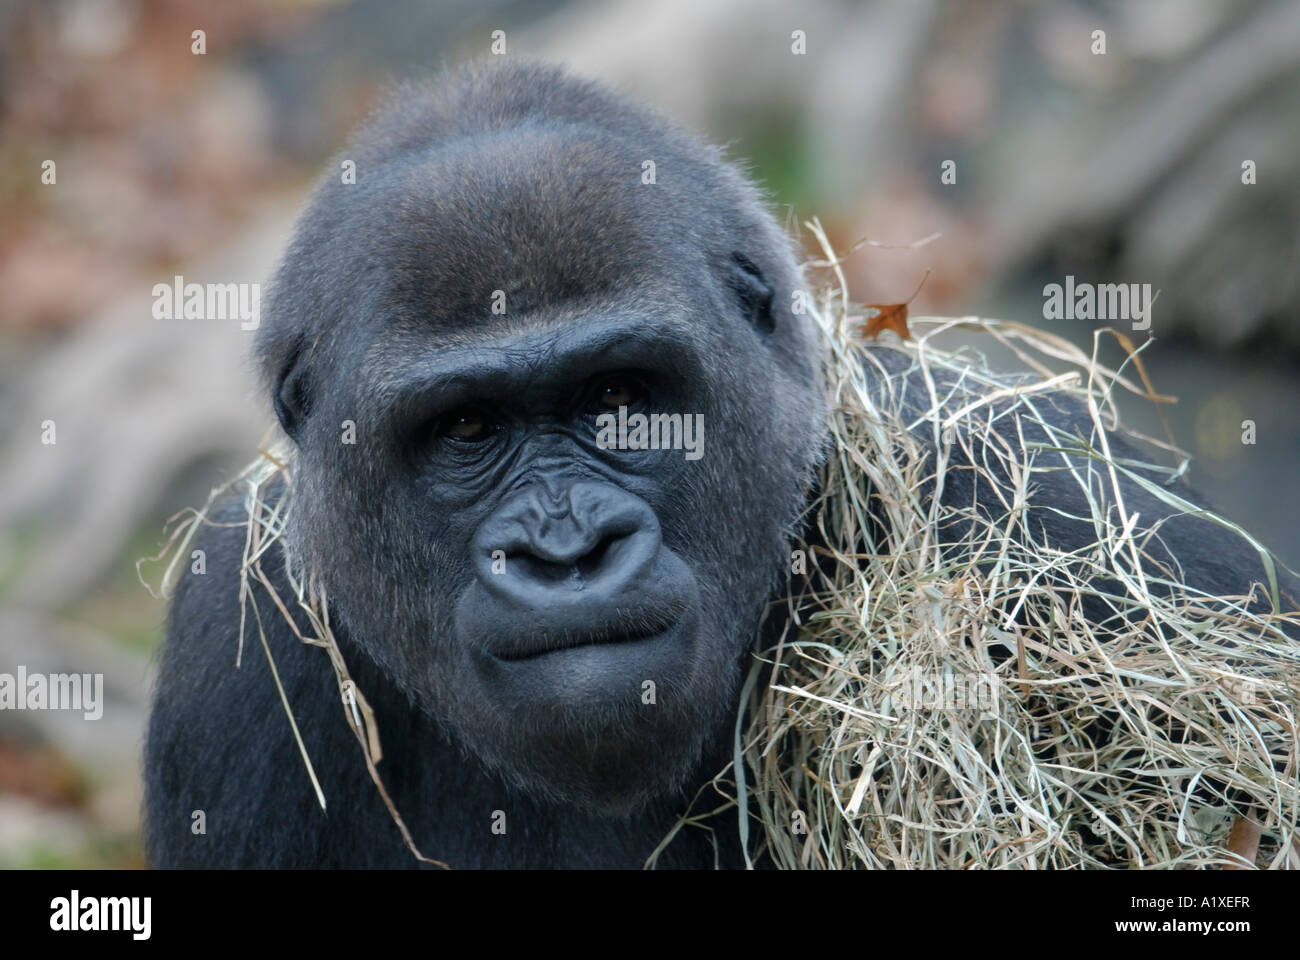 Playful gorilla after throwing hay on head Stock Photo